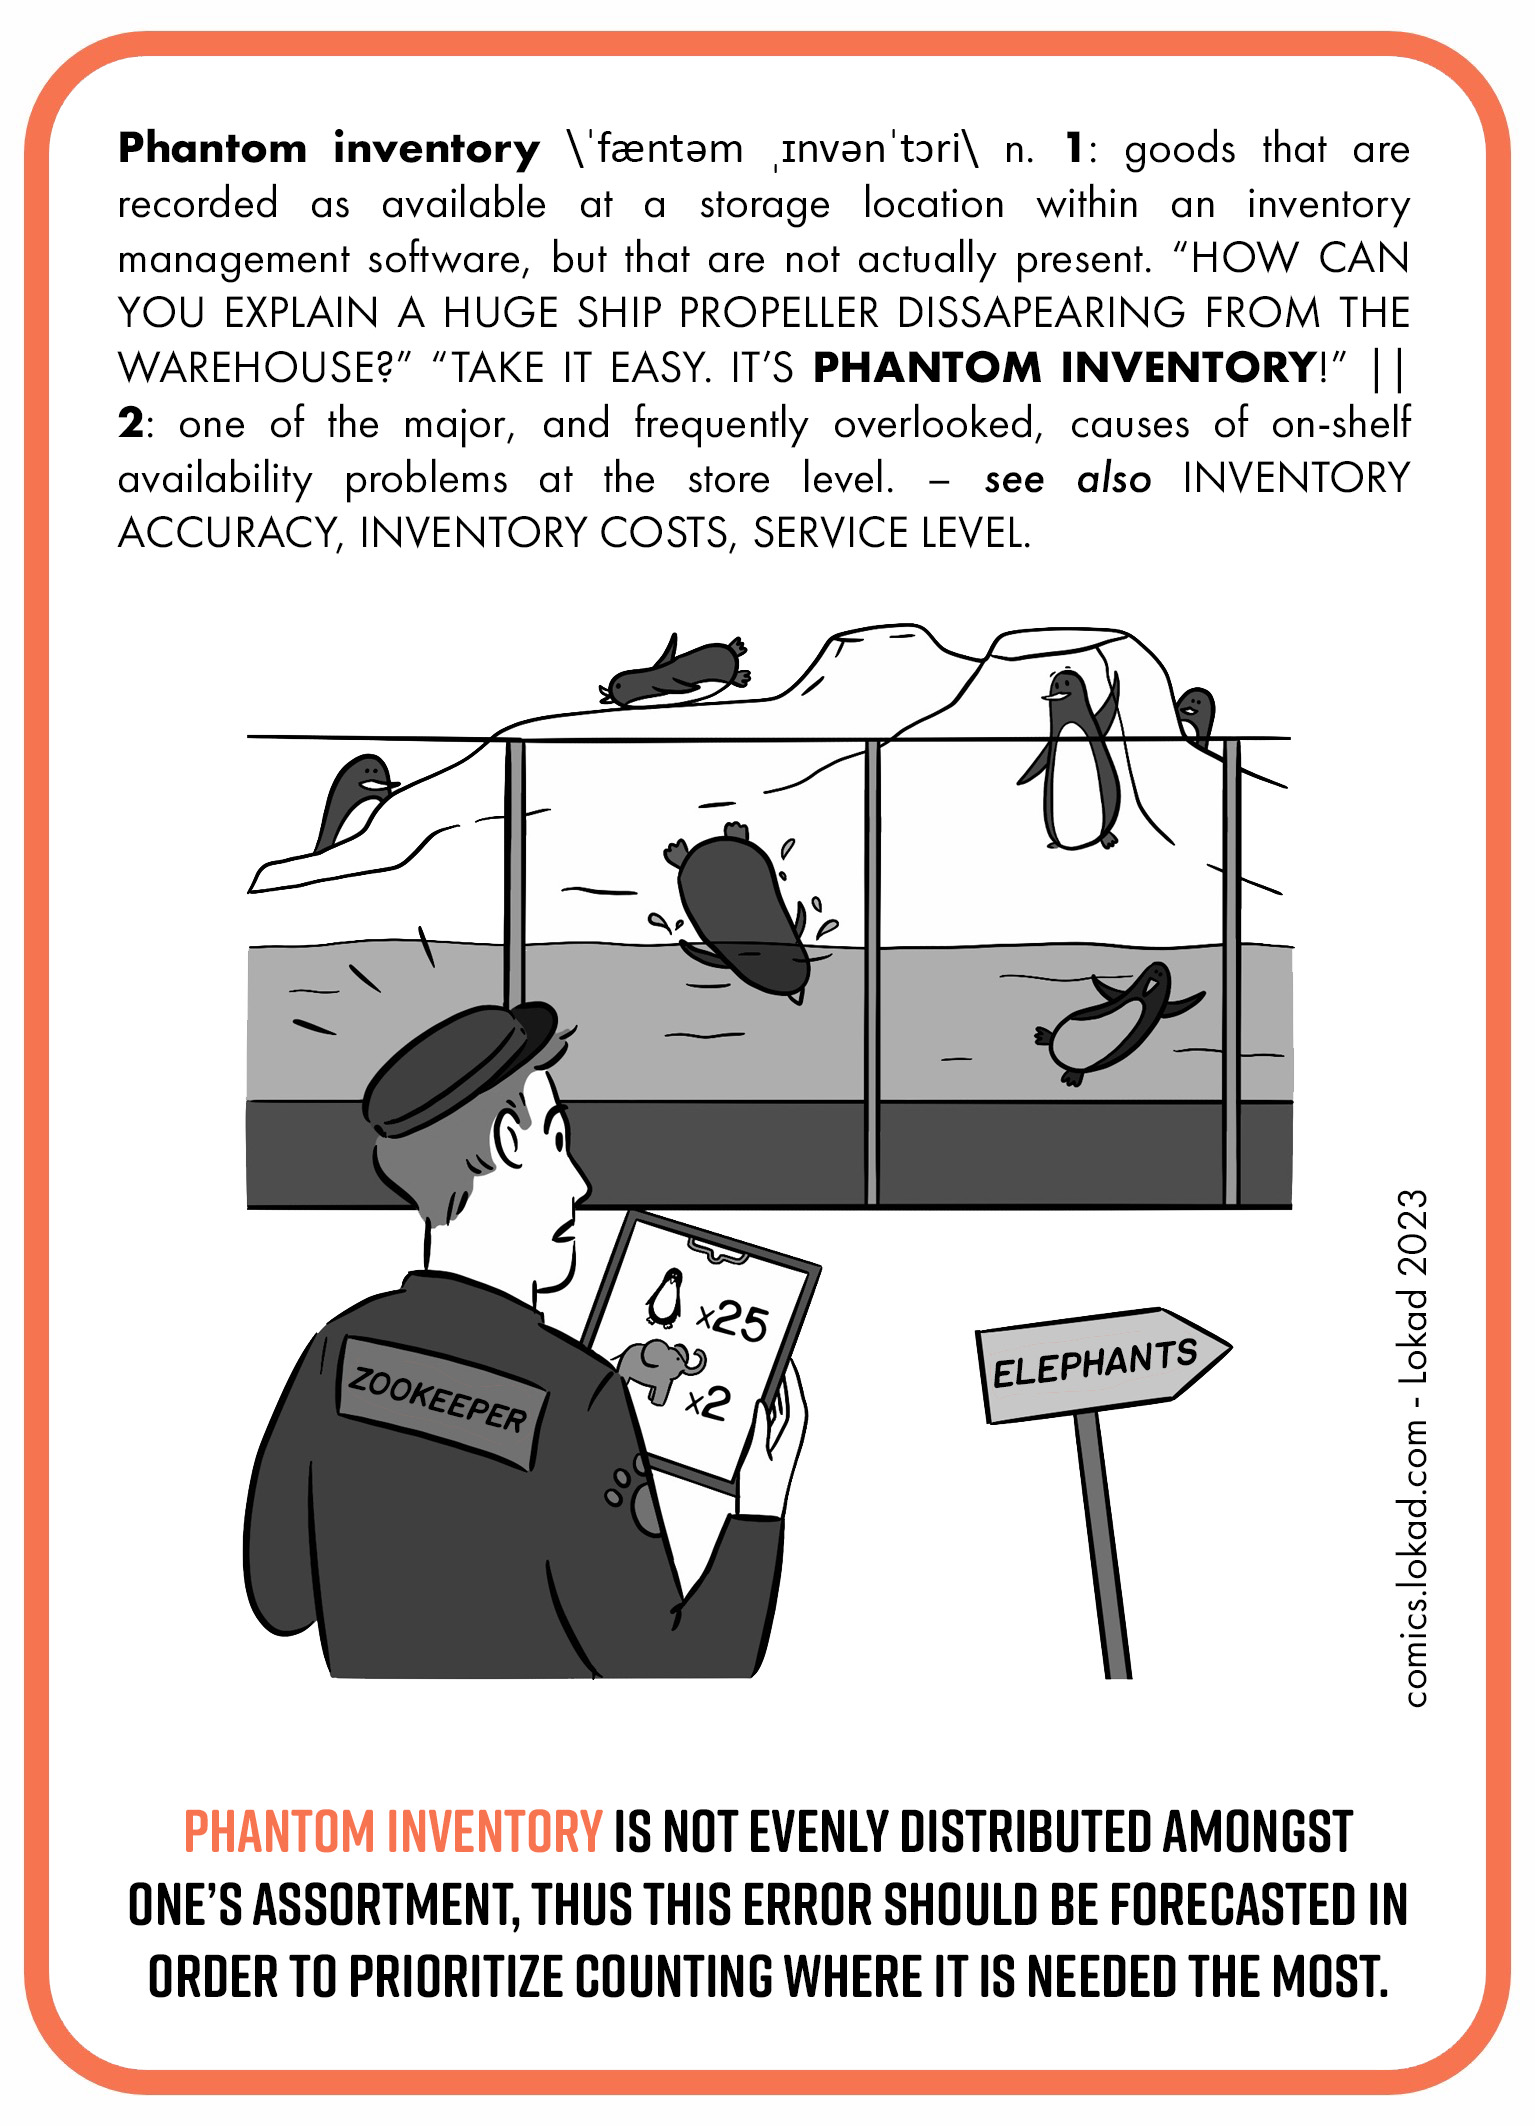 Supply chain flashcard on Phantom inventory, which refers to goods recorded as available in inventory management systems that are not physically present. The image humorously shows a zookeeper with a checklist looking at a pen labeled 25 penguins while only 7 of them are visible in the aviary, symbolizing the confusion caused by phantom inventory in supply chains. The card notes that phantom inventory is unevenly distributed and should be forecasted to prioritize counting where most needed.